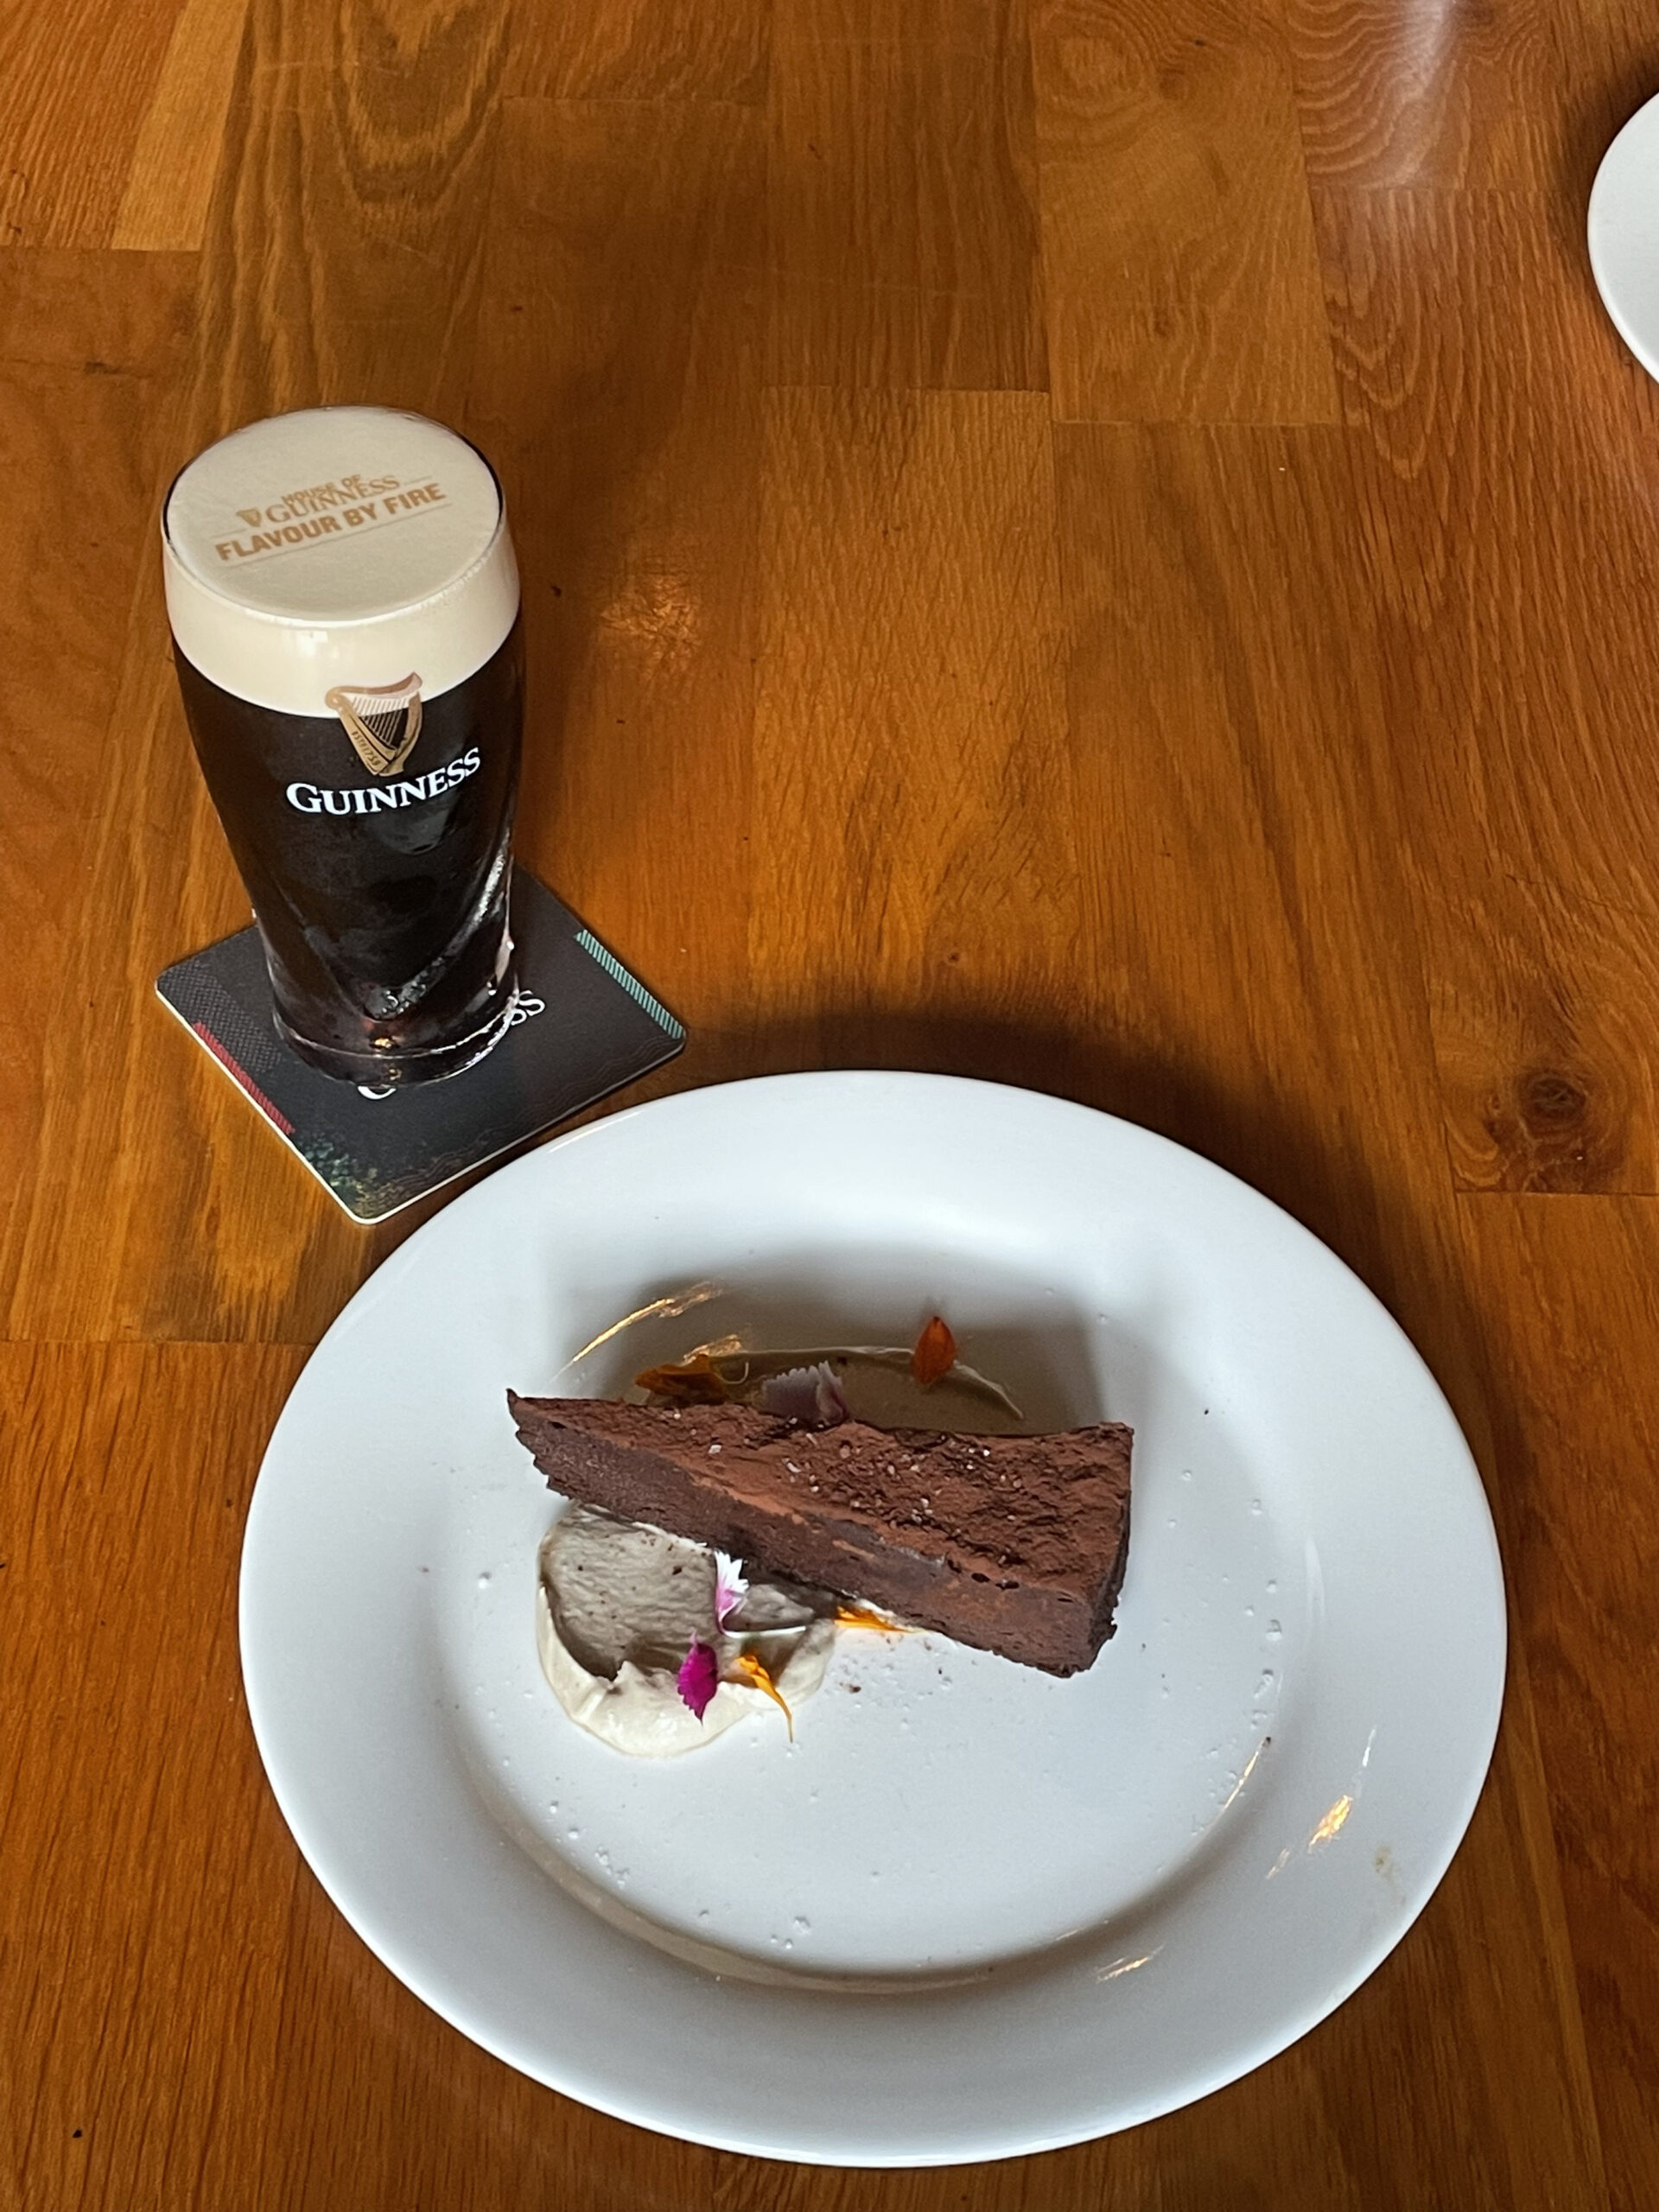 Guinness-infused cream with flourless cholcolate cake